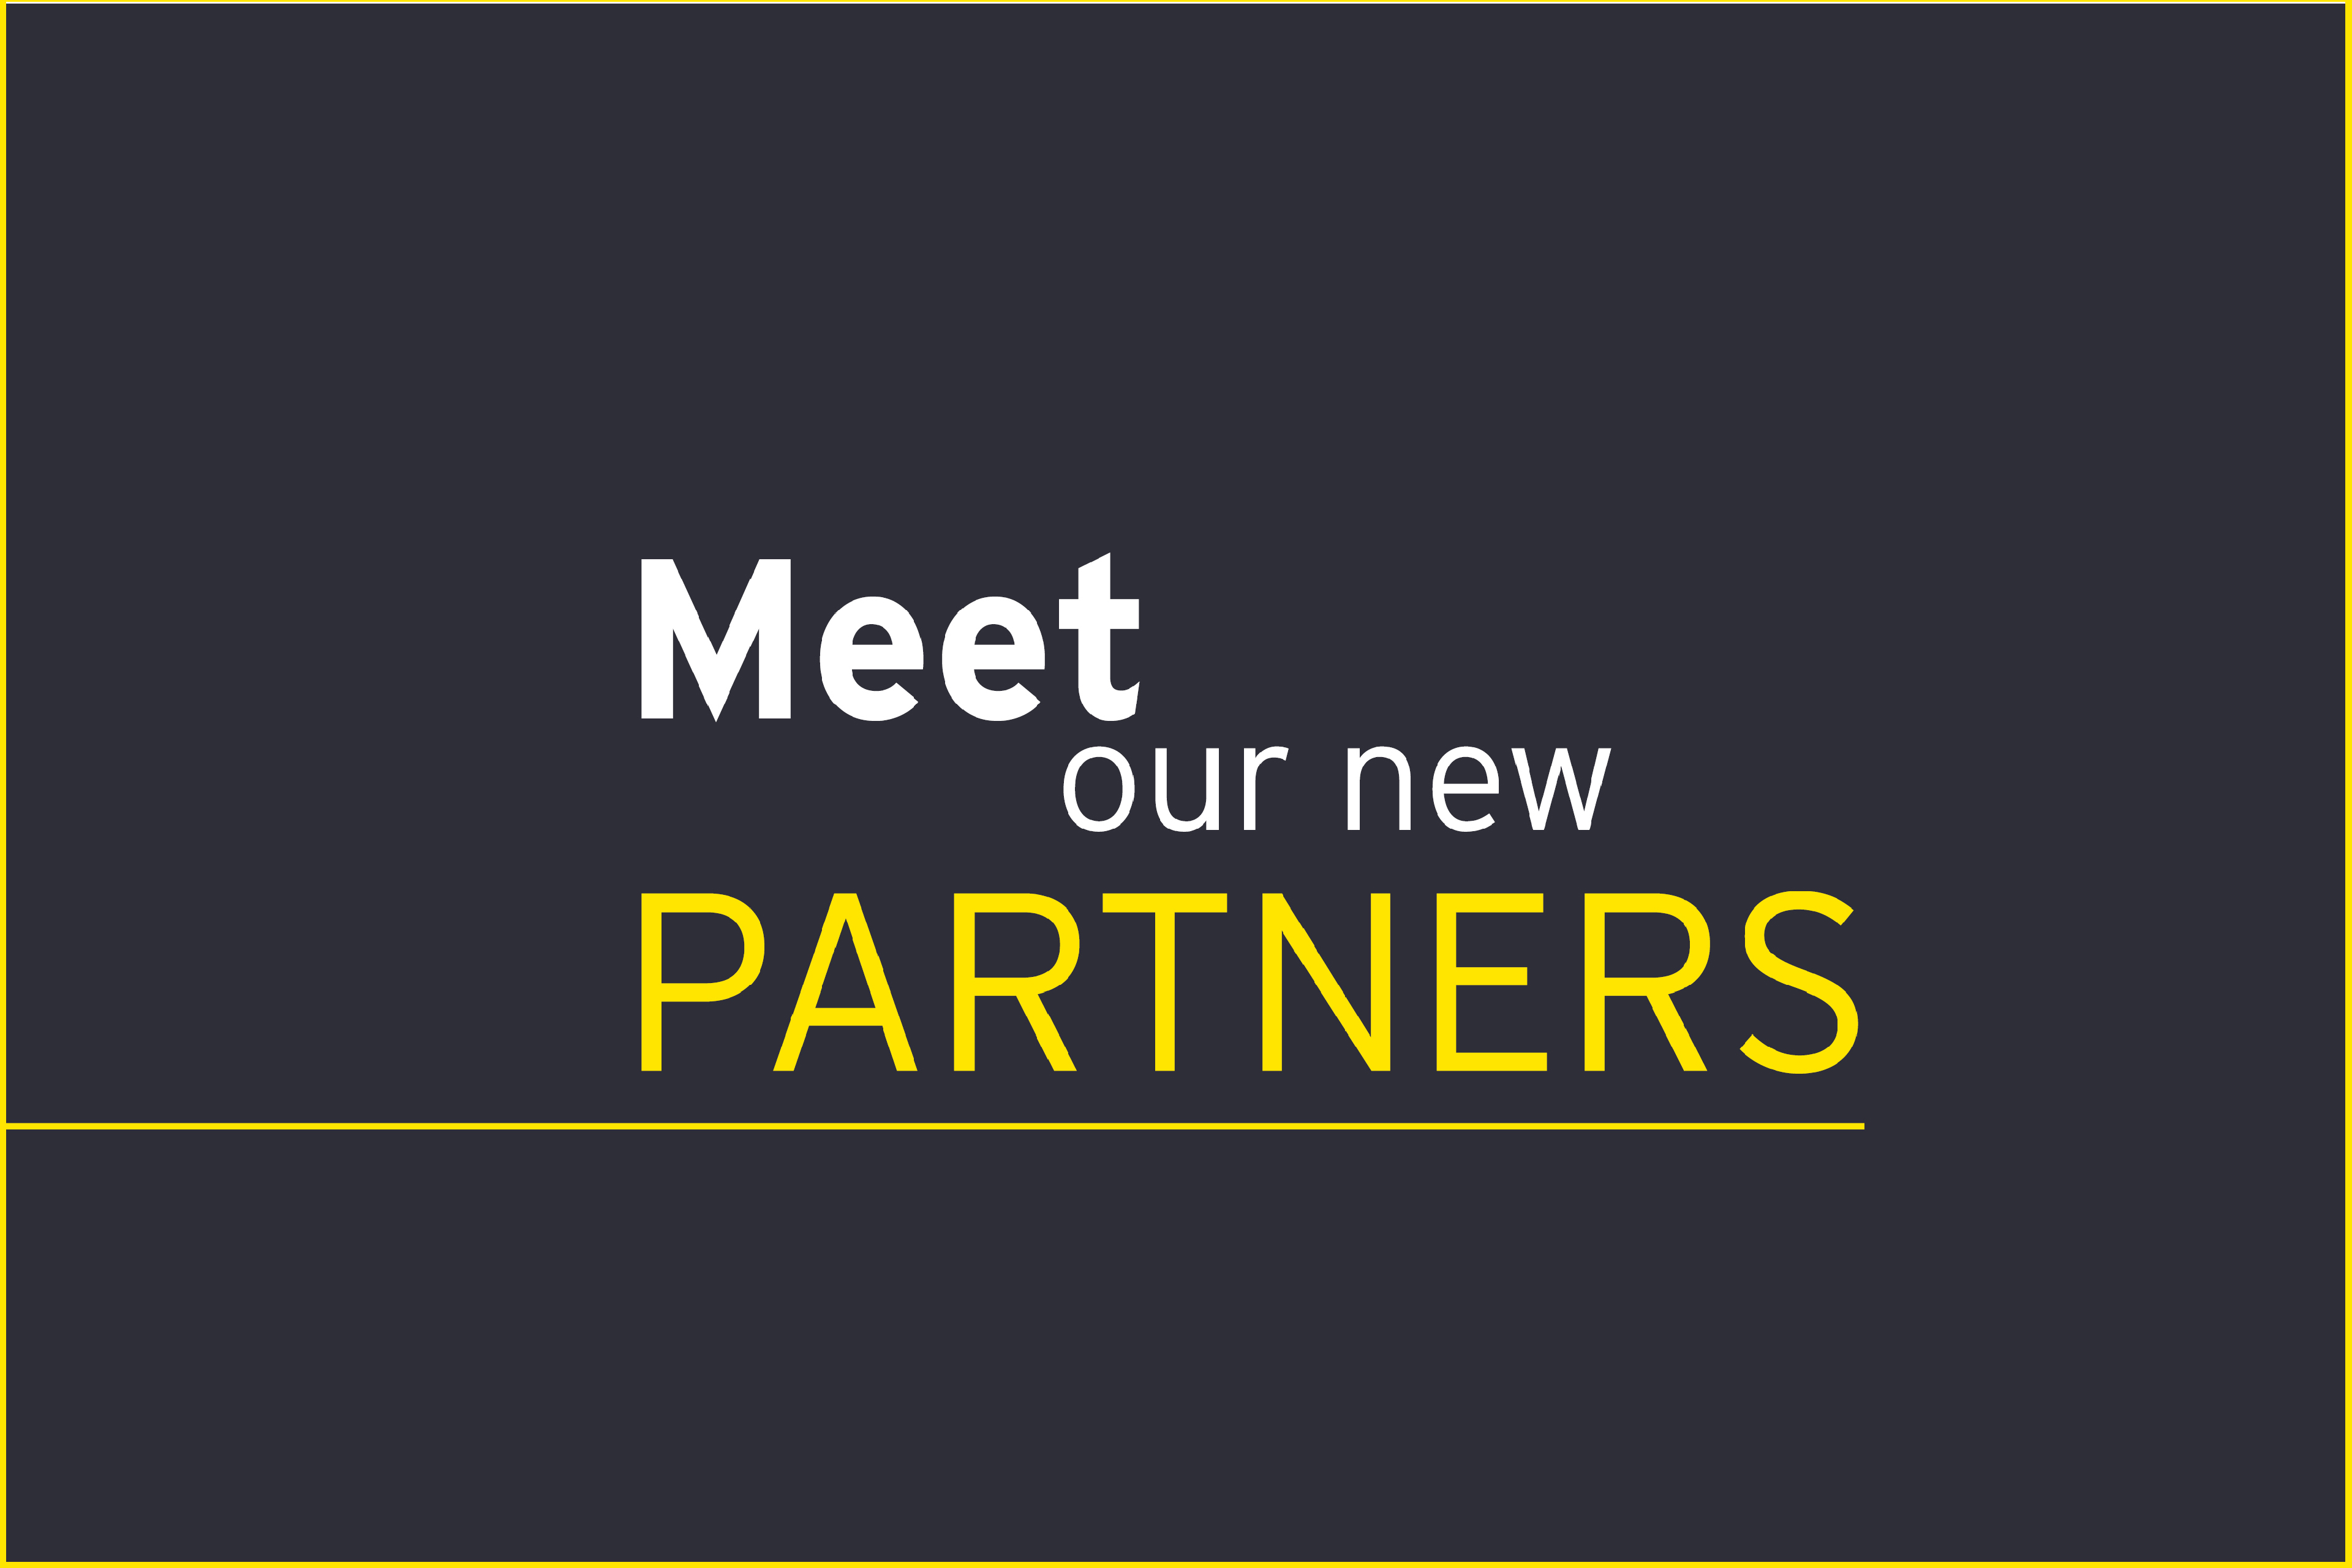 Meet our new Partners